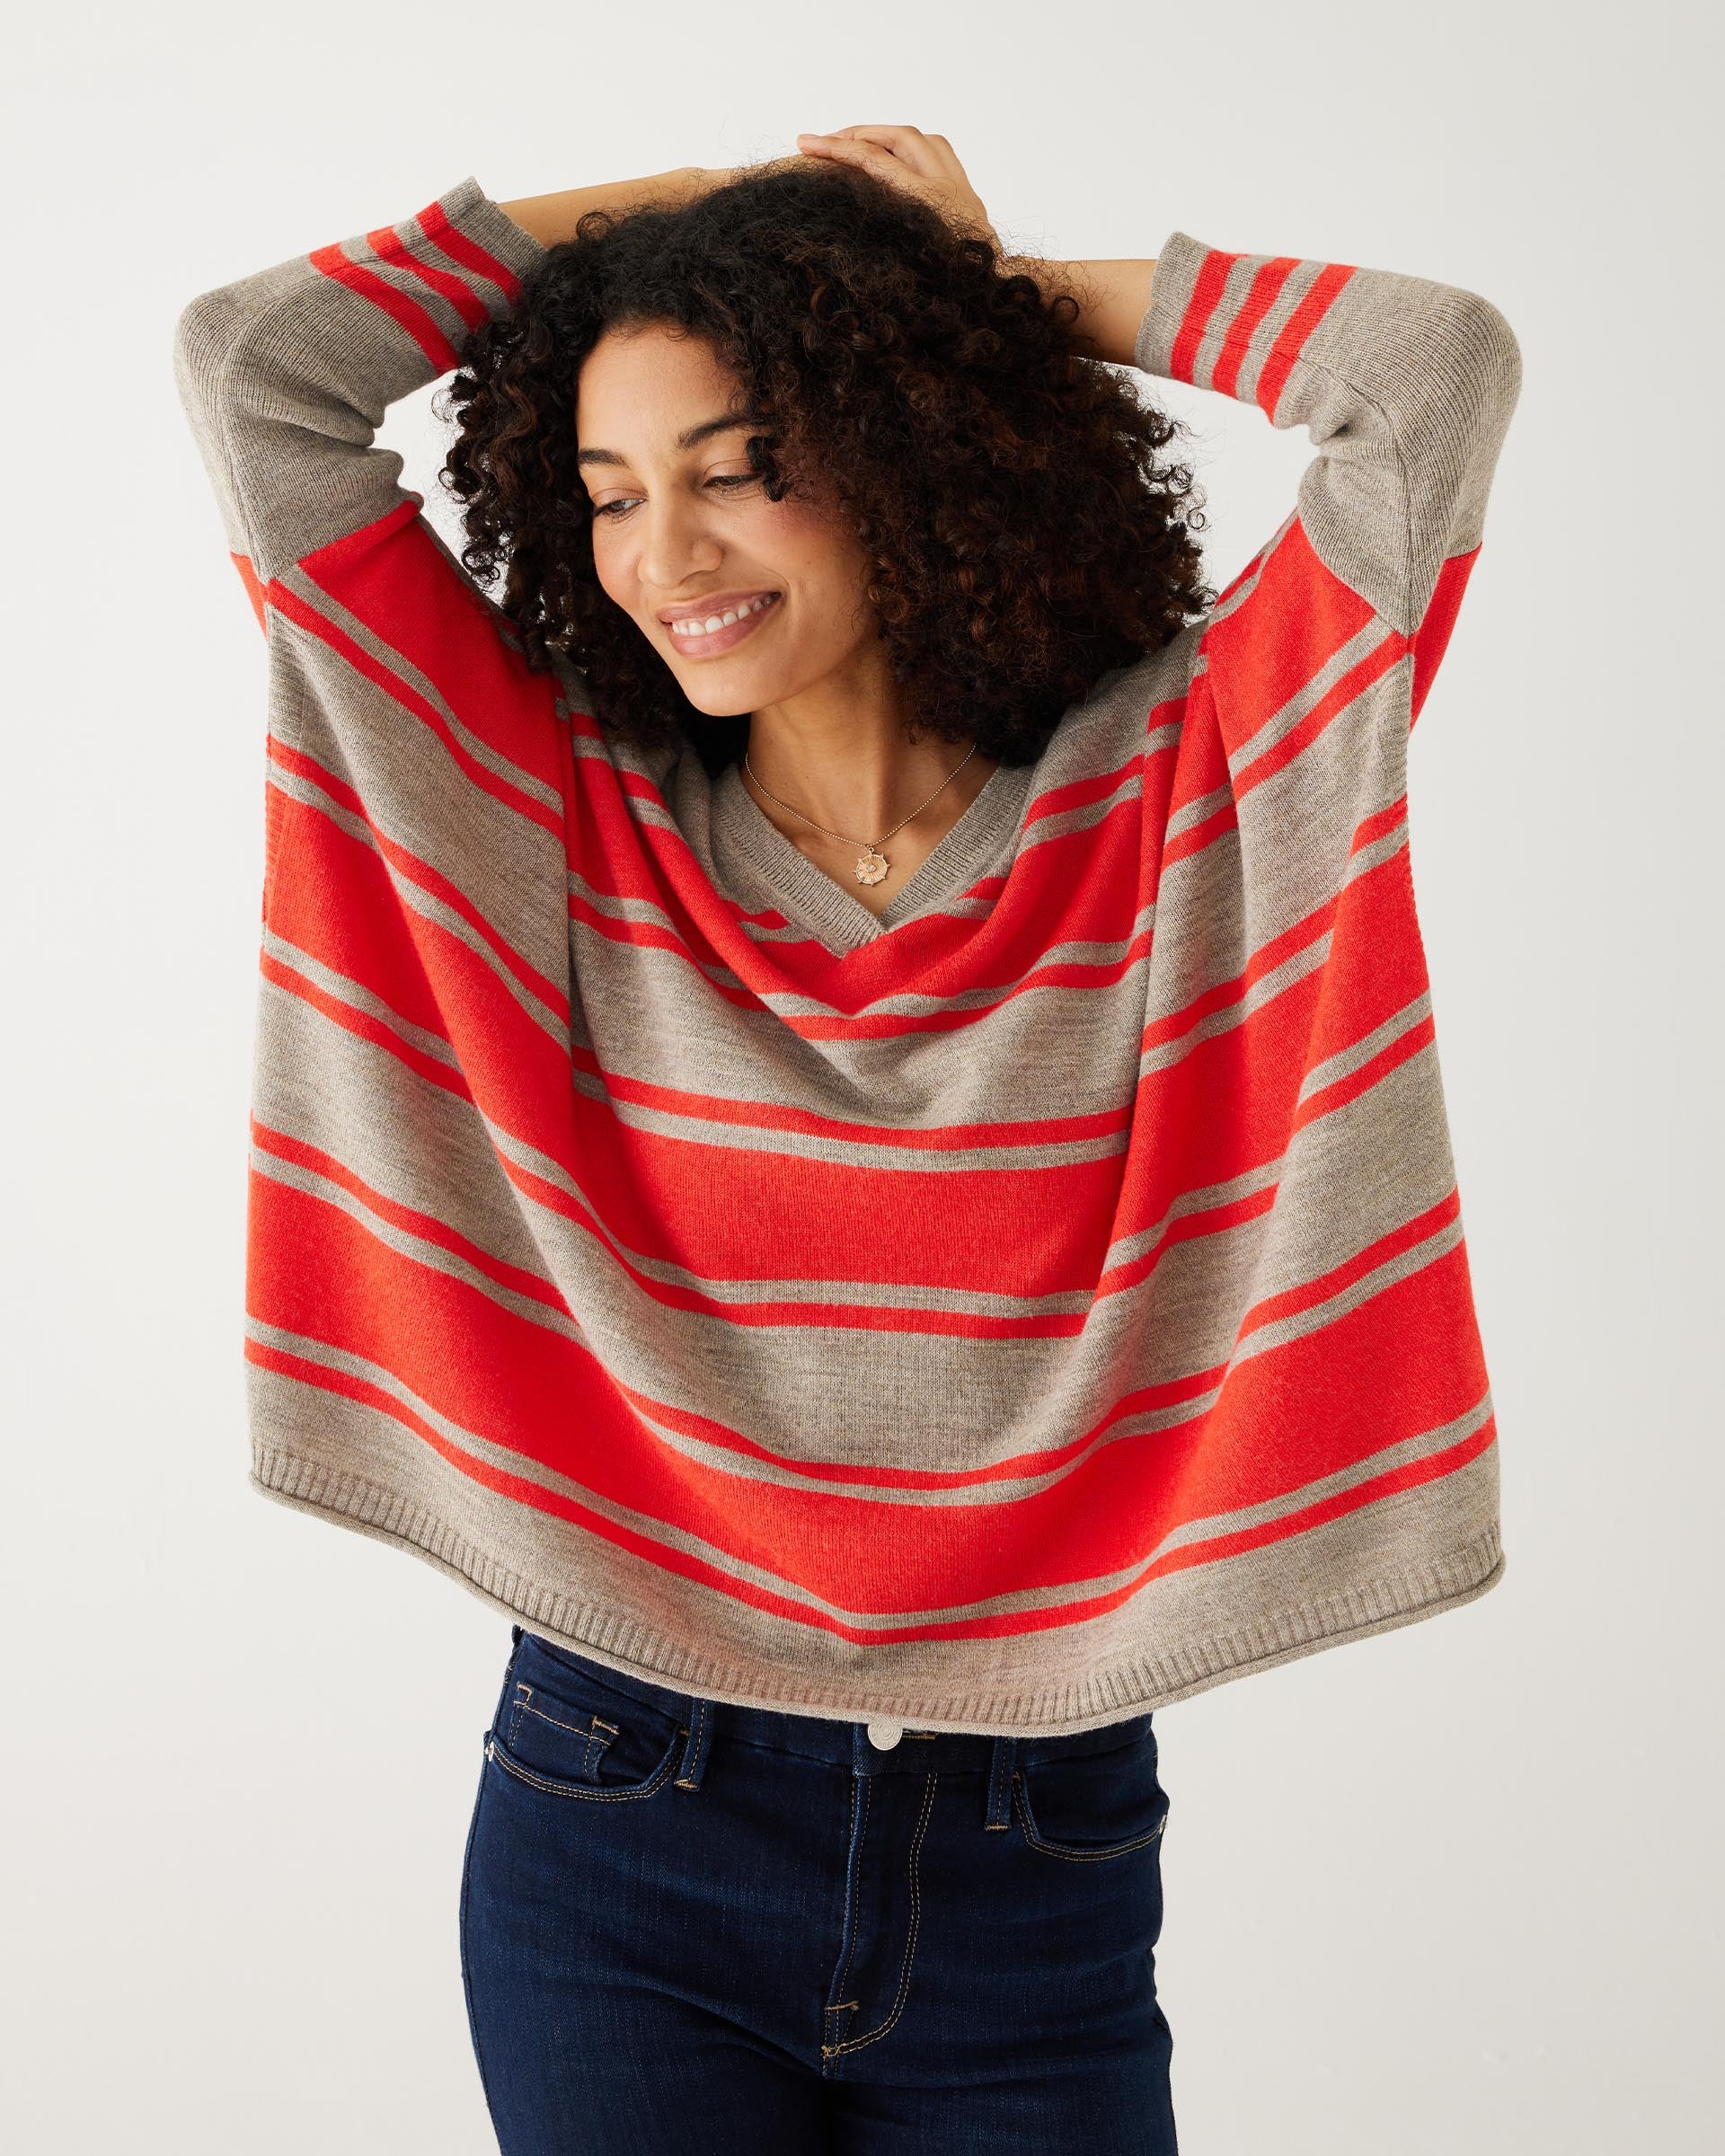 female wearing a brown and red stripe v-neck sweater and blue denim in front of white background